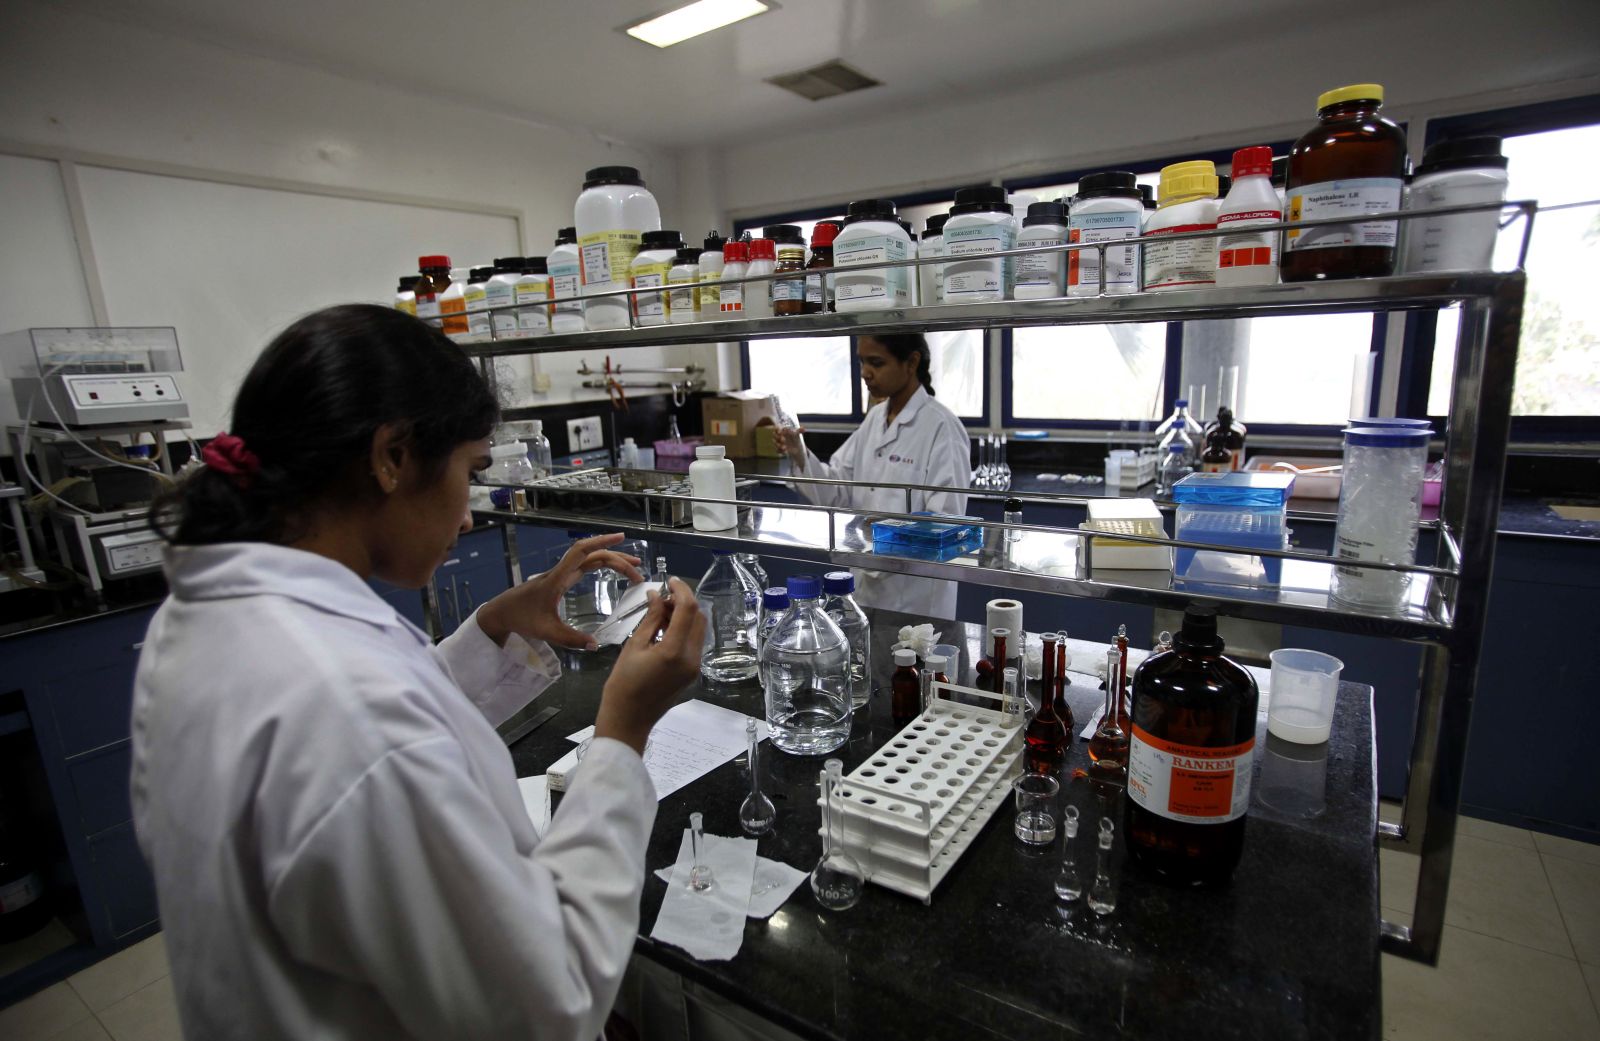 India’s private sector has grown fast: pharma lab in Hyderabad.